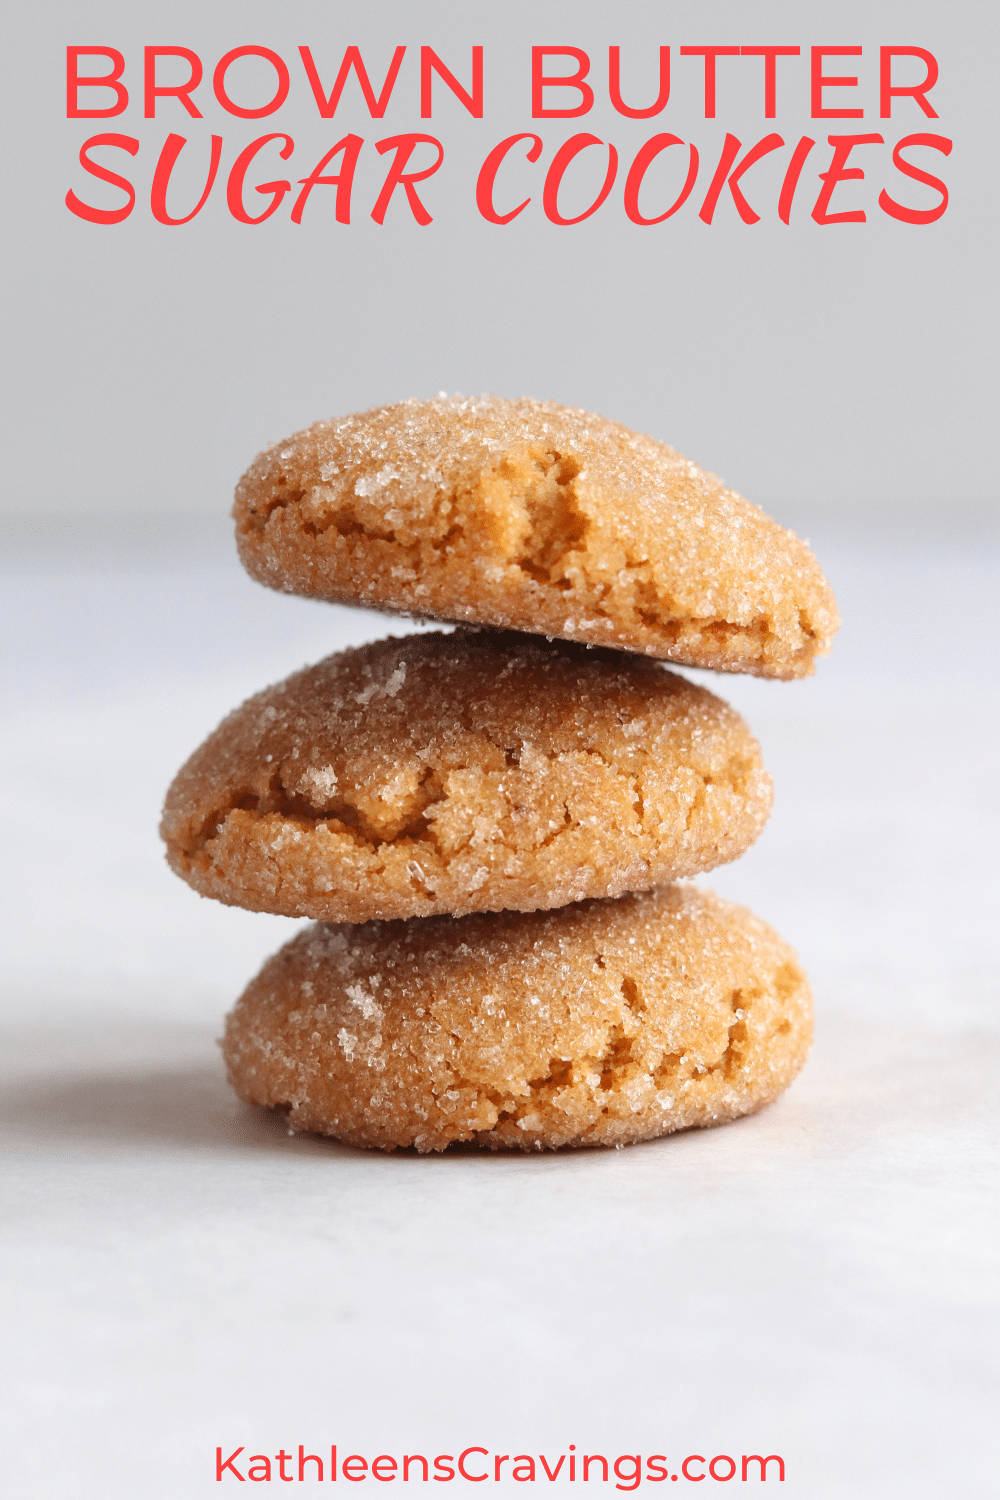 Stack of brown butter sugar cookies with text overlay